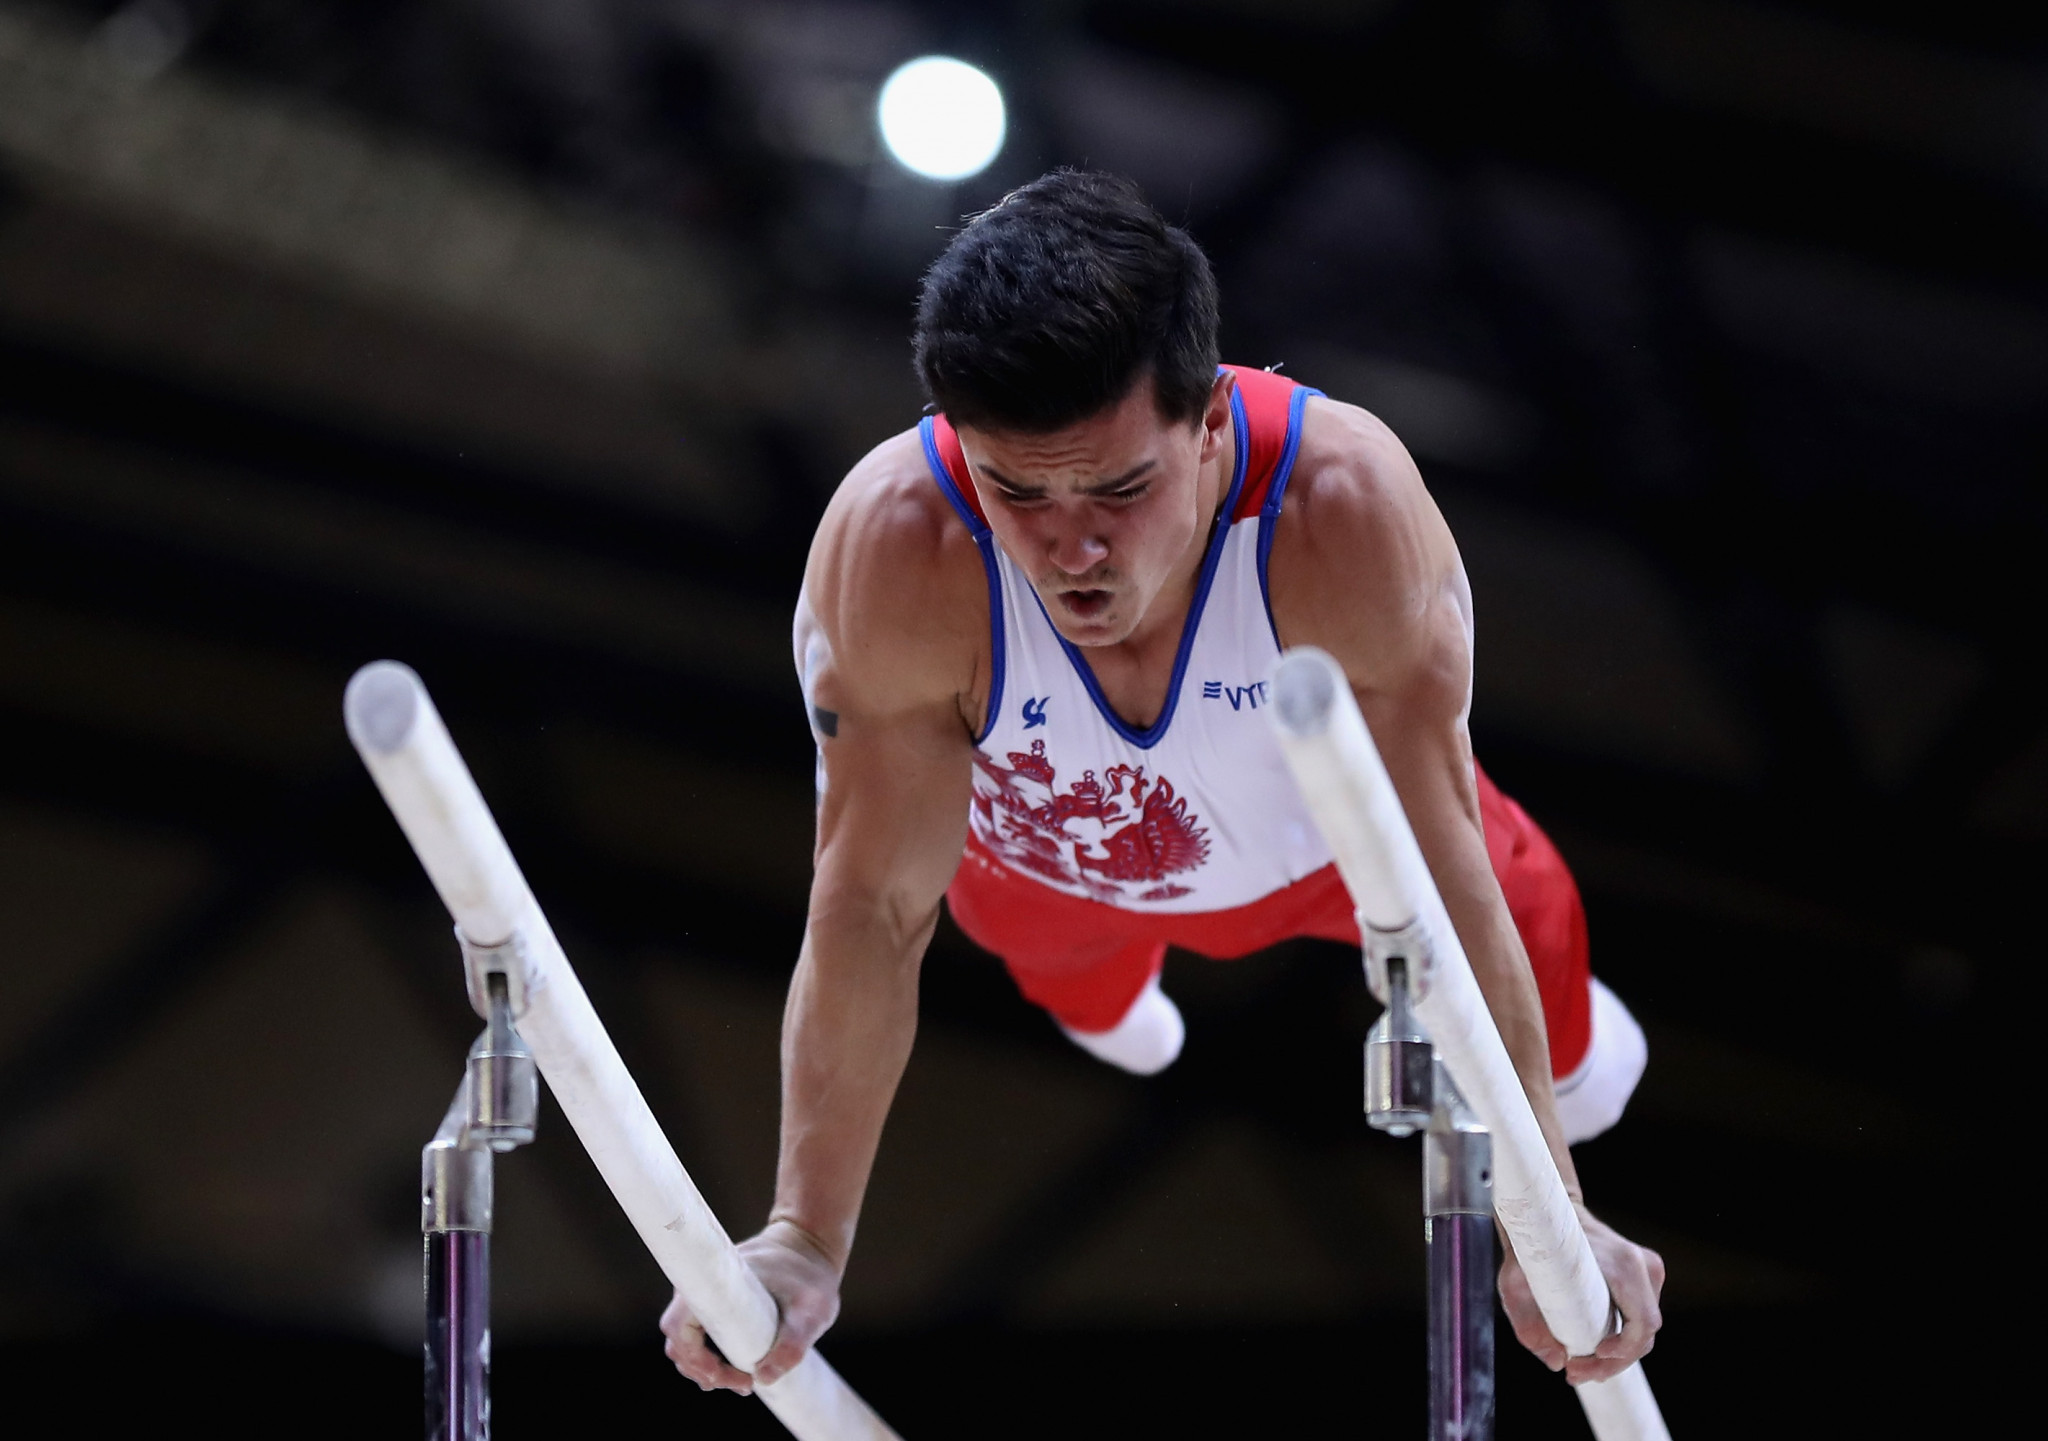 Russia’s Artur Dalaloyan topped the men's all-around qualification standings as action begun today at the European Artistic Gymnastics Individual Championships in Polish city Szczecin ©Getty Images